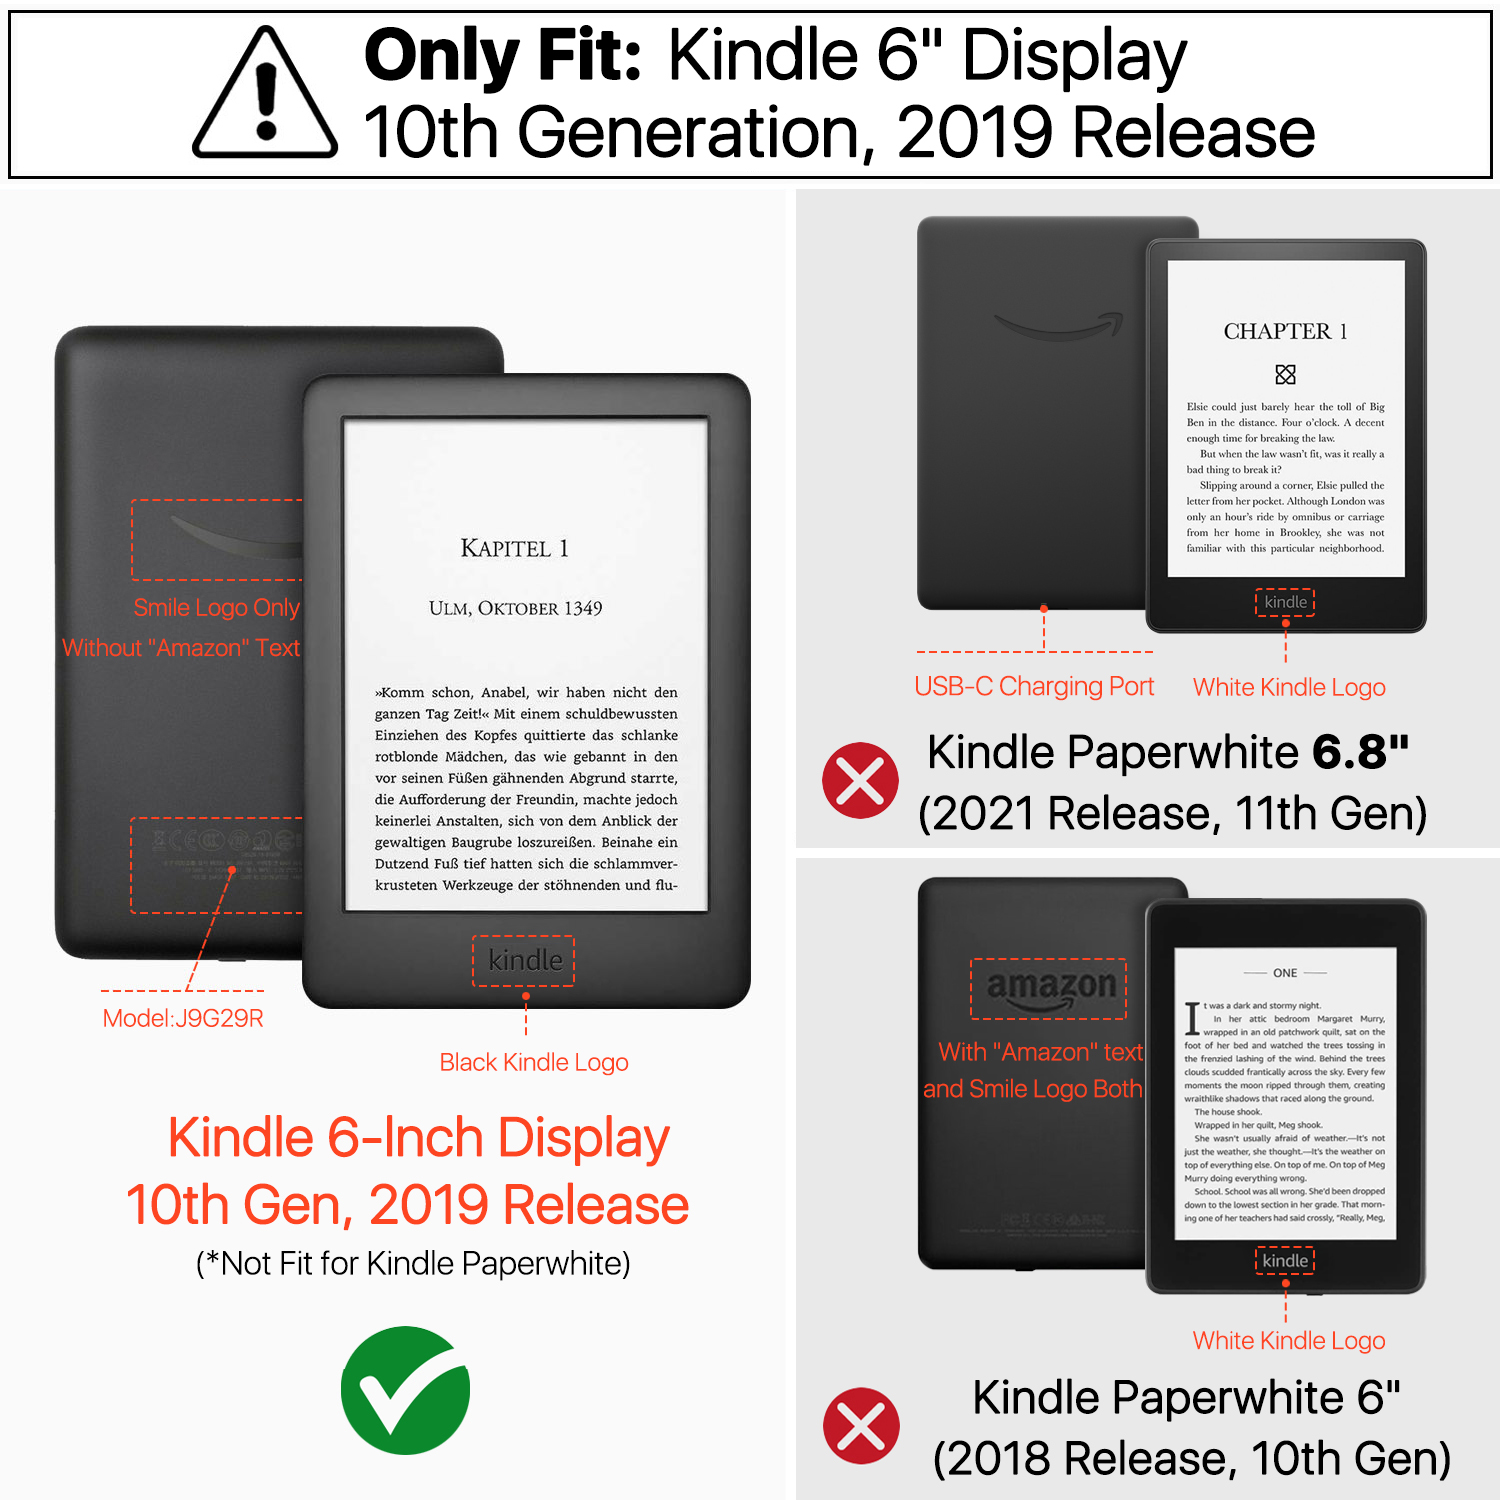 Designed specifically with Auto Wake/Sleep for Amazon All-New Kindle E-reader (6" Display, 10th Generation 2019 Release)